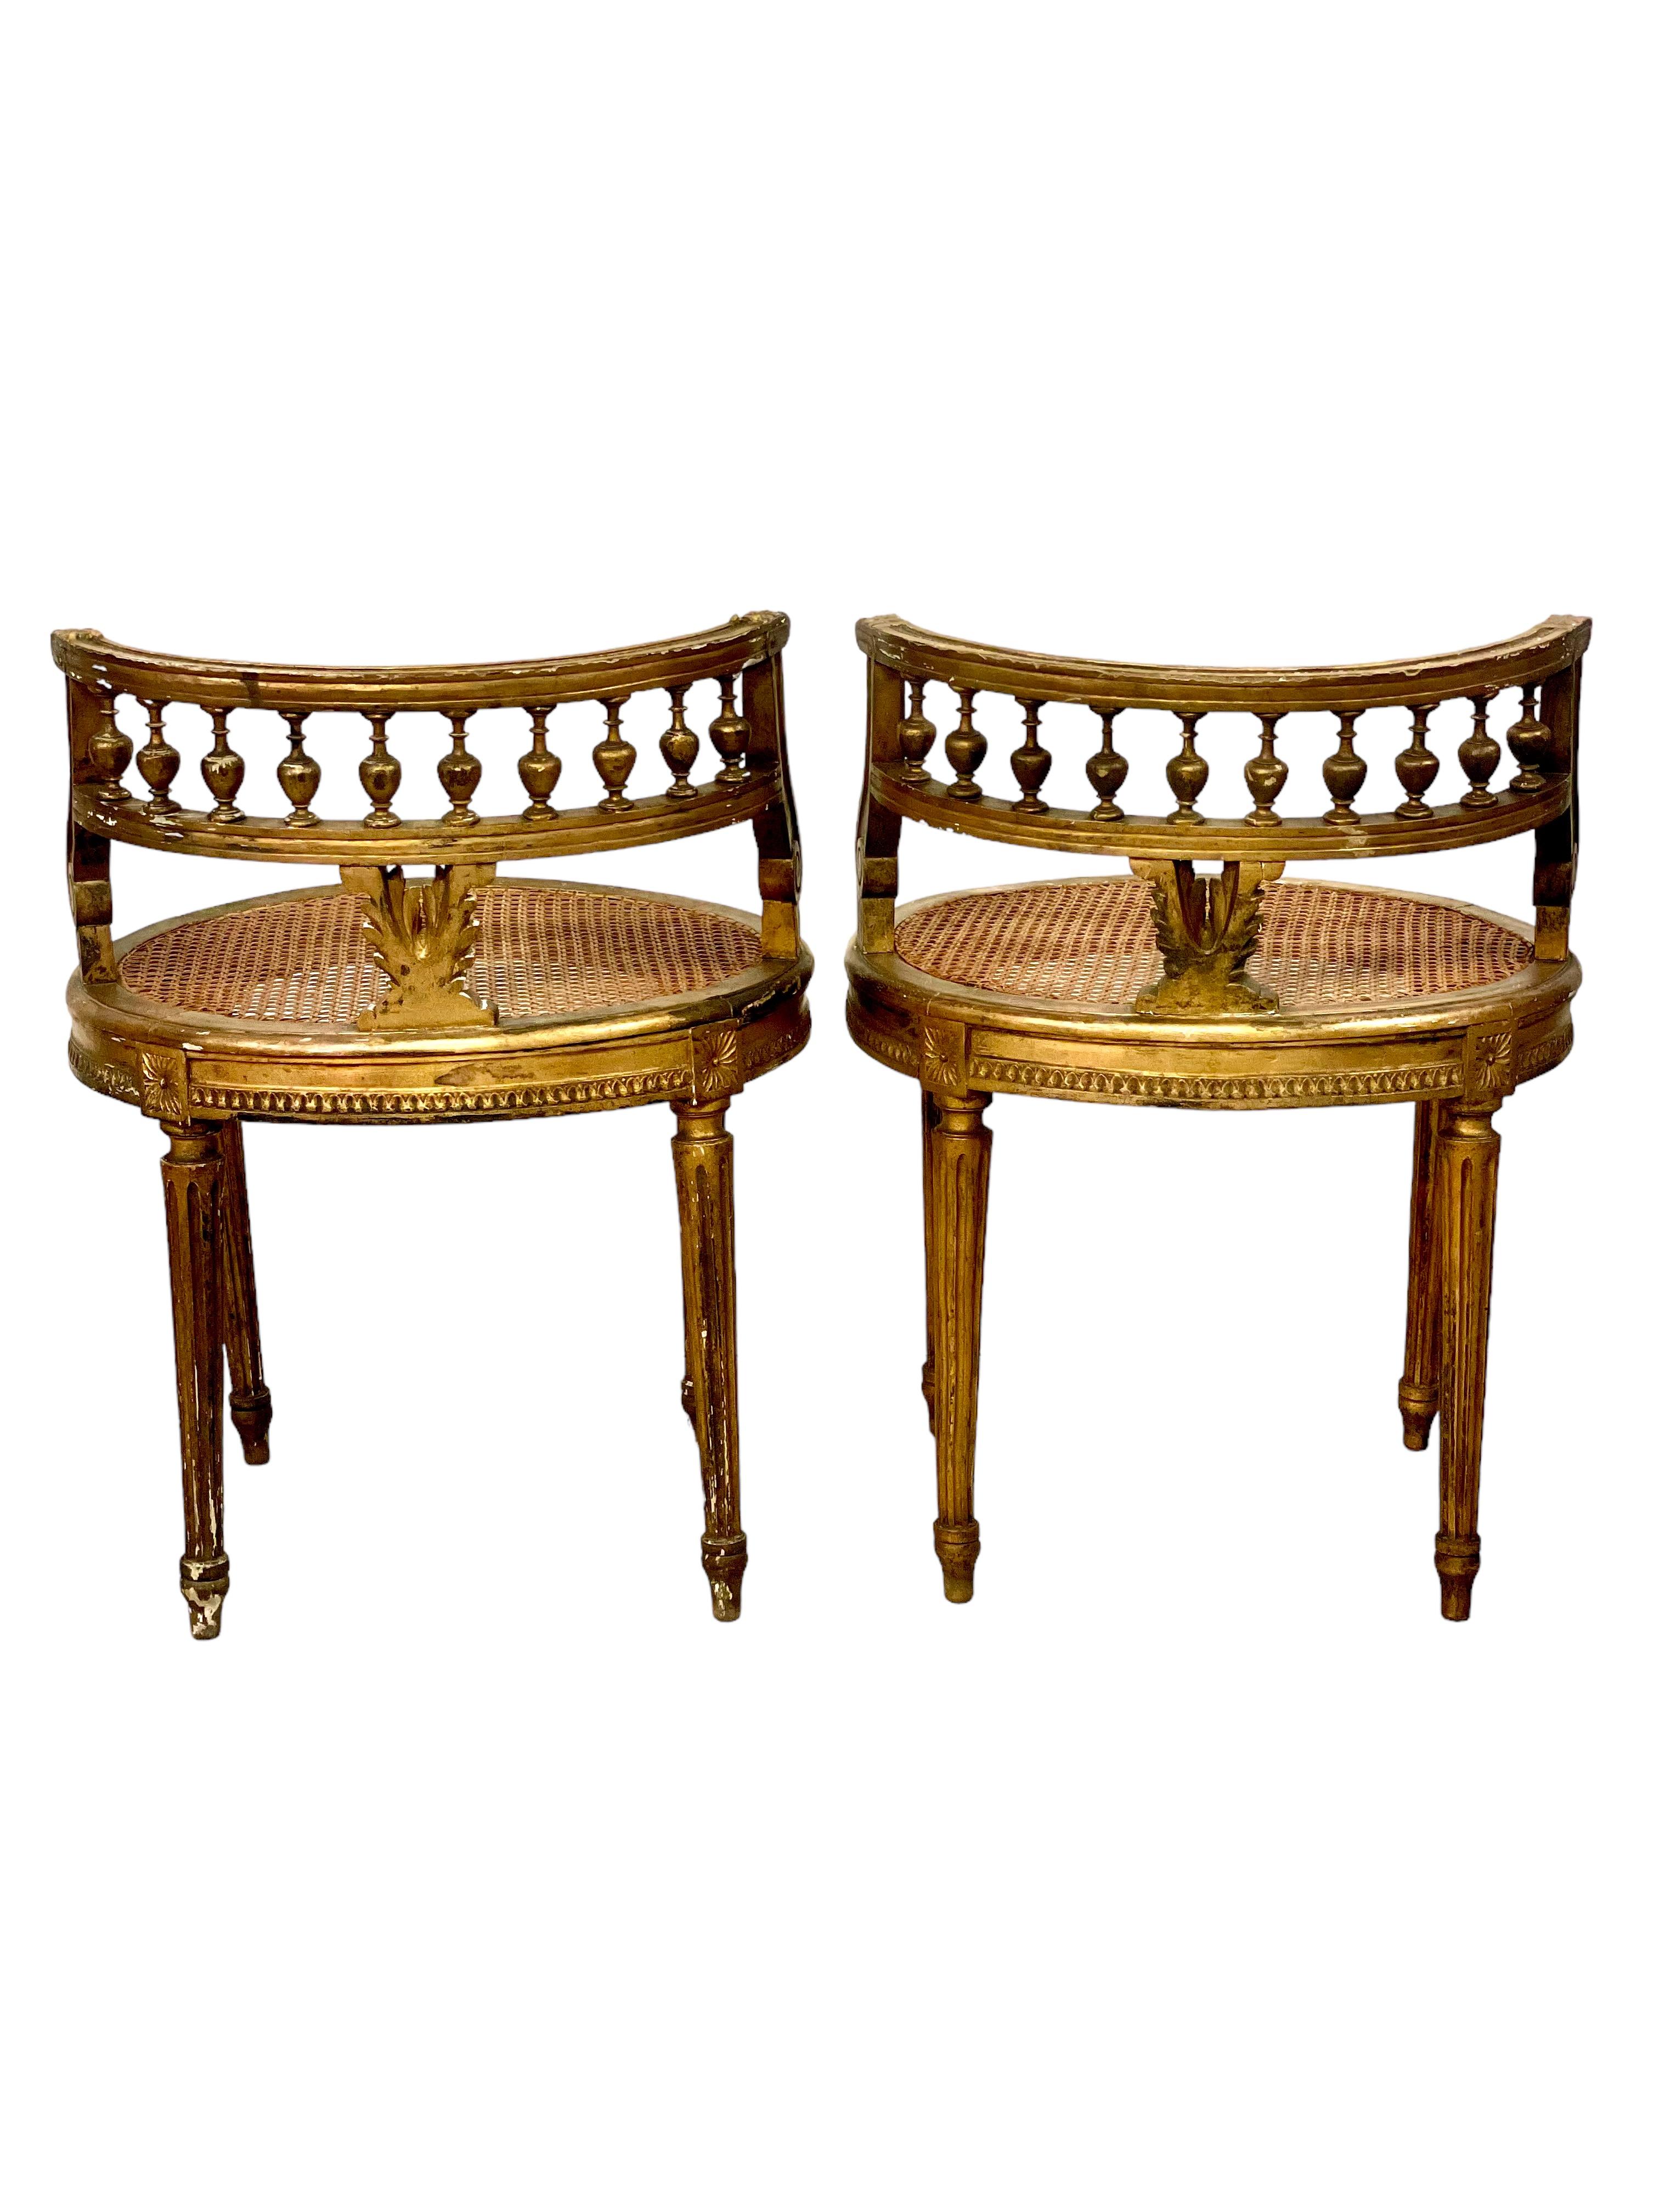 Pair of Antique French Louis XVI Gilt Caned Chairs  For Sale 4